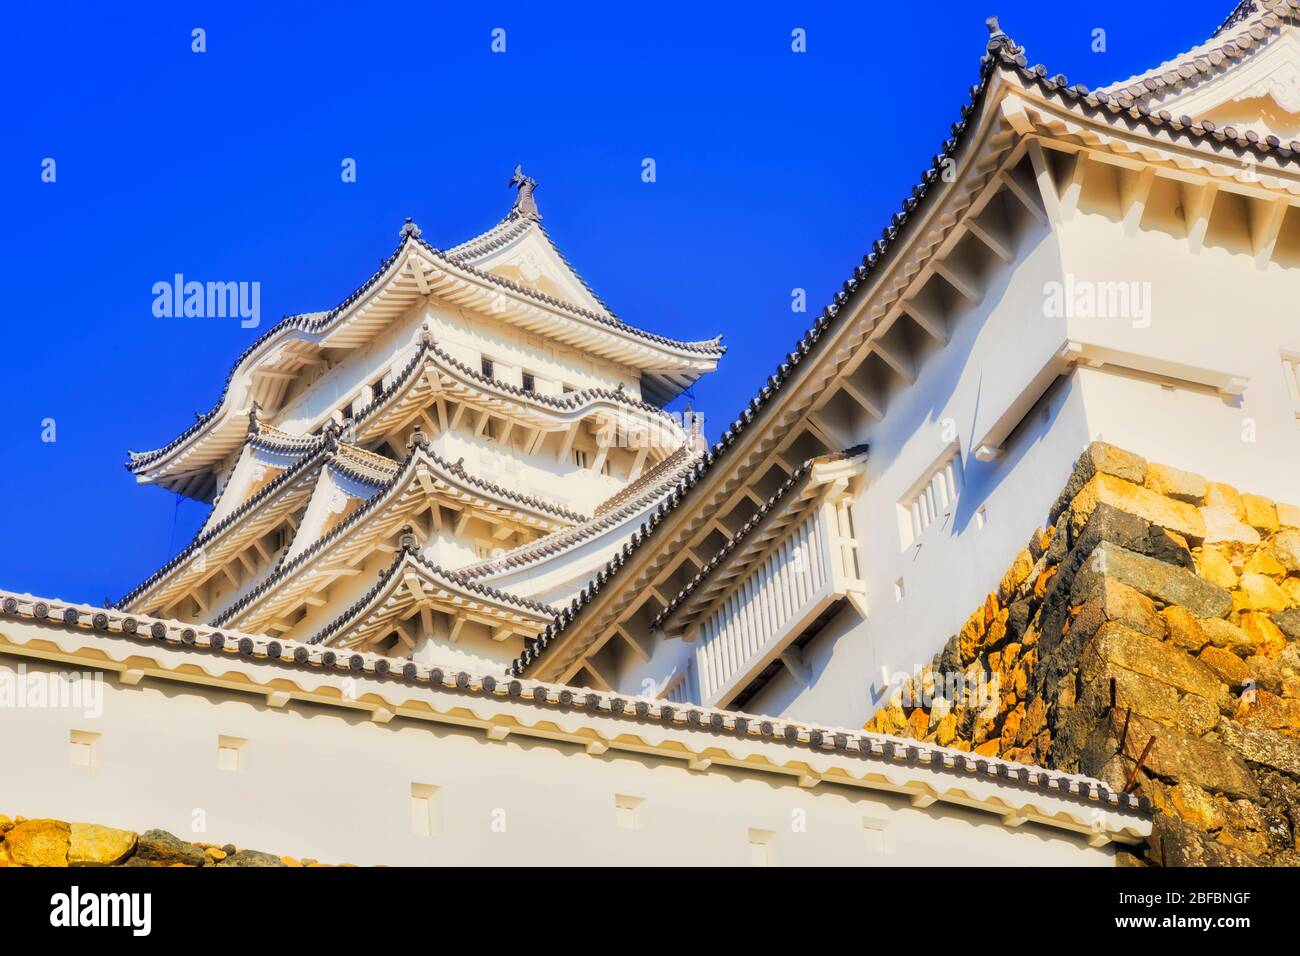 Geometry of tall white towers and traditional japanese roofs with beams - historic Himeji castle. Stock Photo